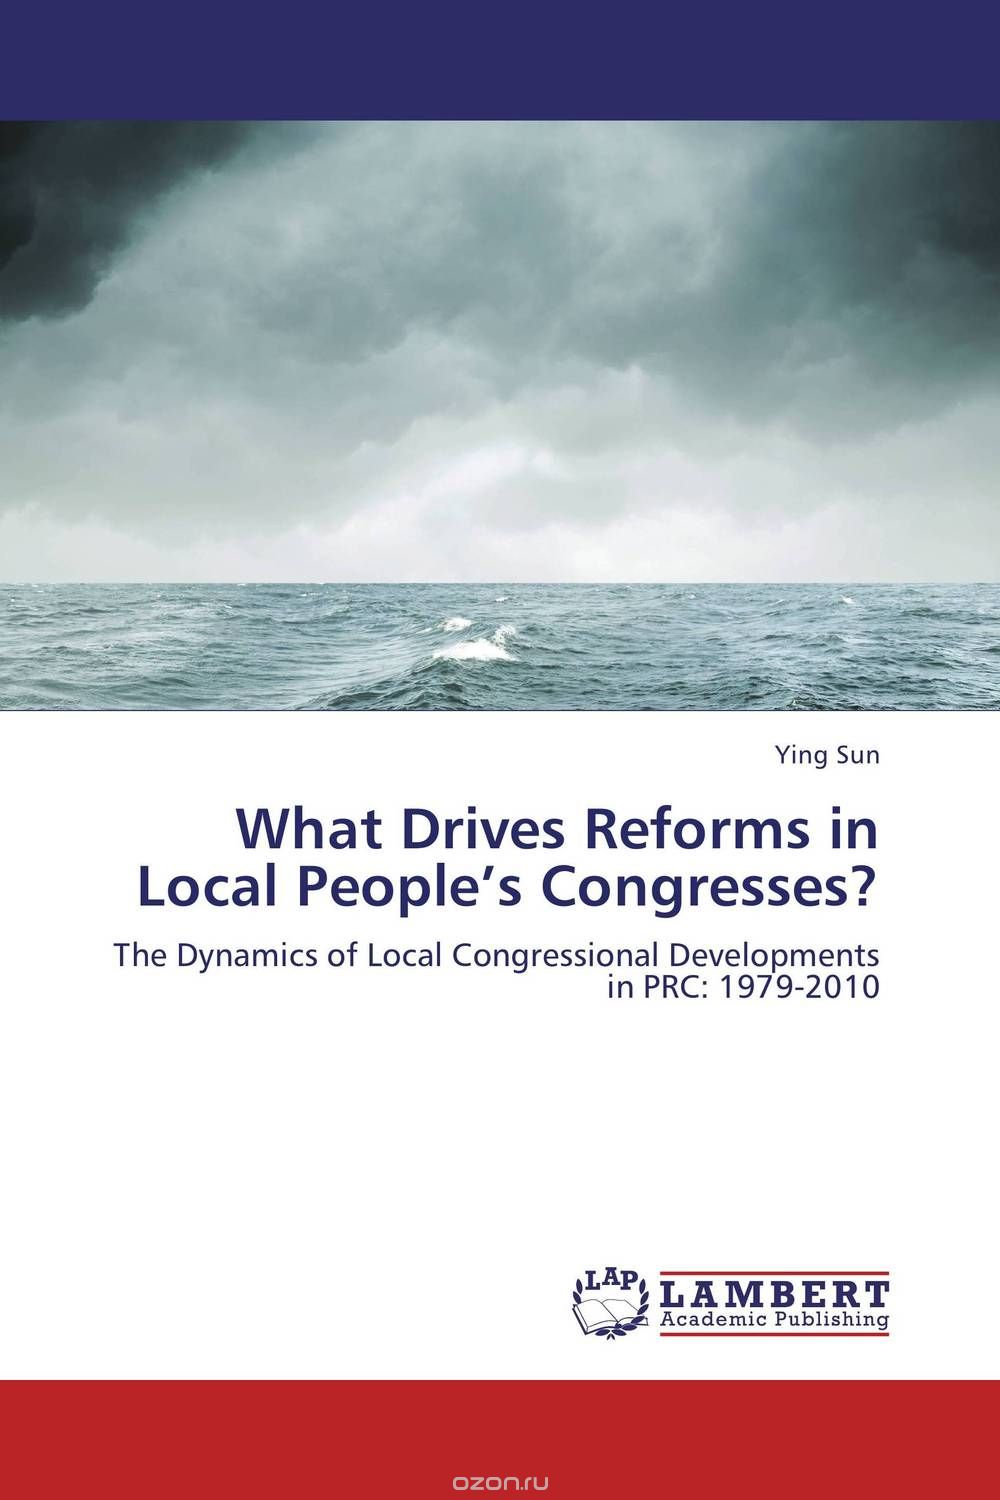 What Drives Reforms in Local People’s Congresses?